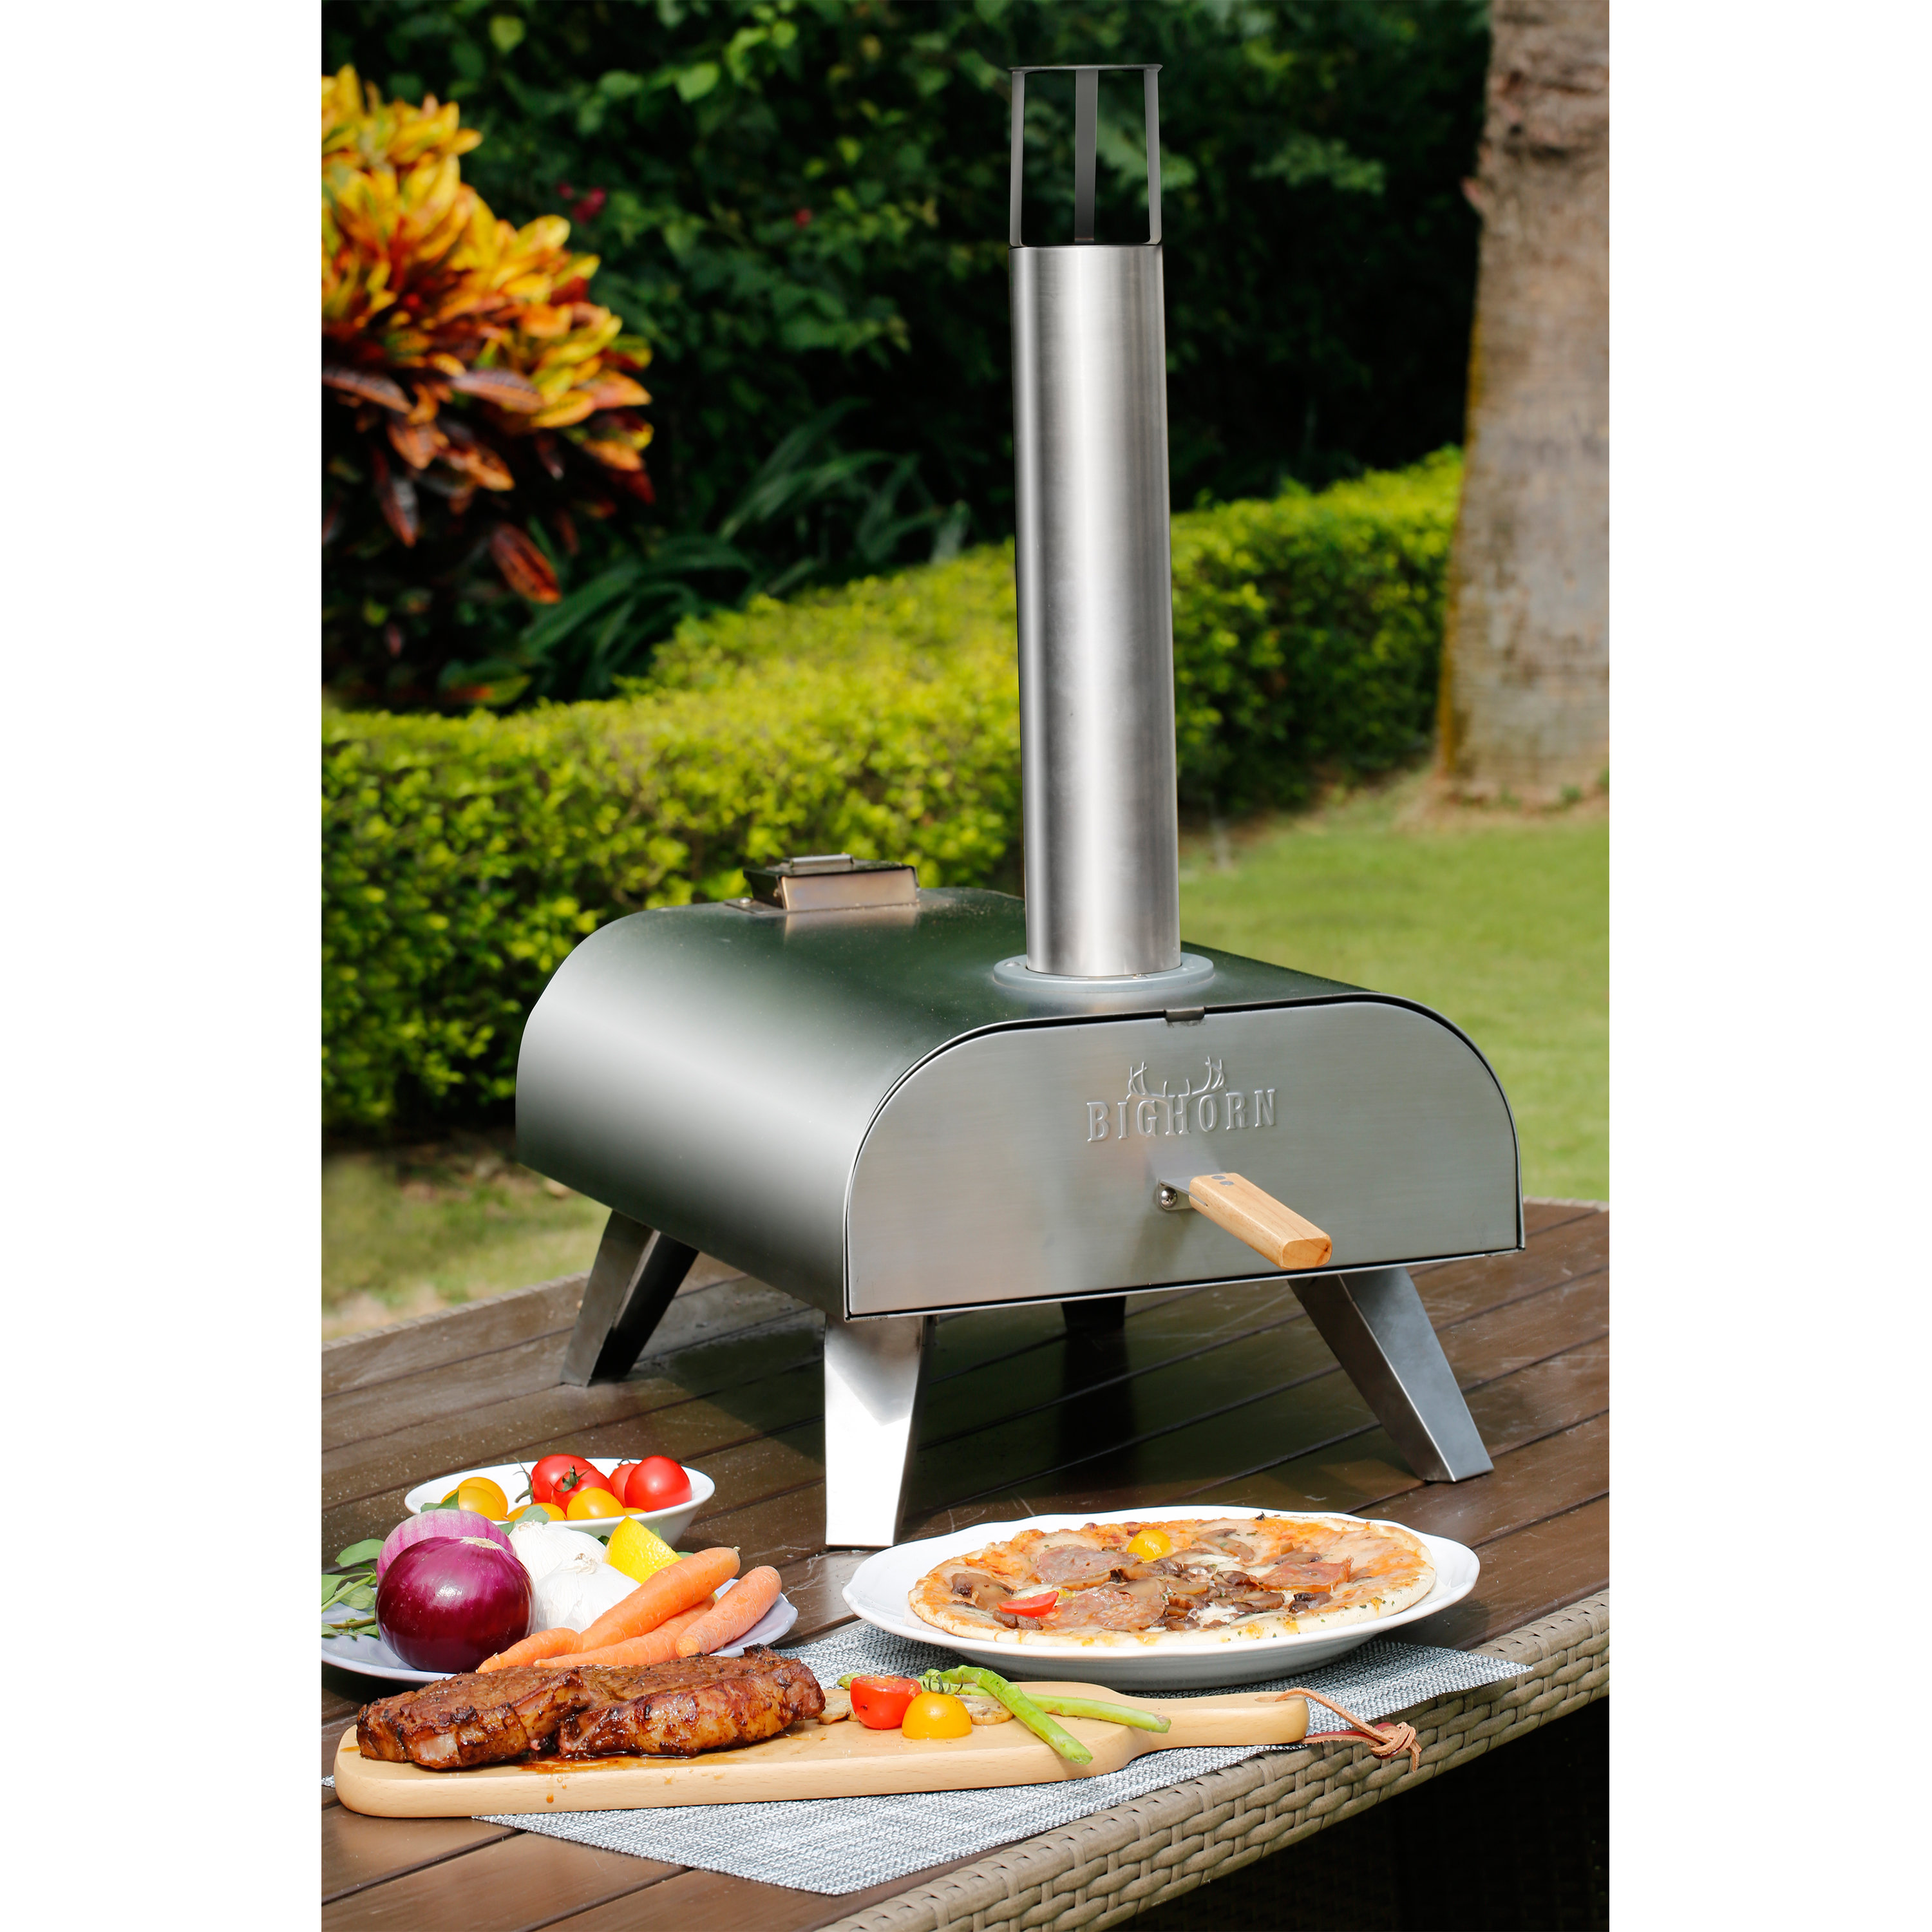  15'' Outdoor Pizza Oven Wood Fired Pizza Oven Portable Patio  Ovens Included Pizza Stone, Pizza Peel, Fold-up Legs, Cover Cooking Rack  for Camping Backyard BBQ : Patio, Lawn & Garden